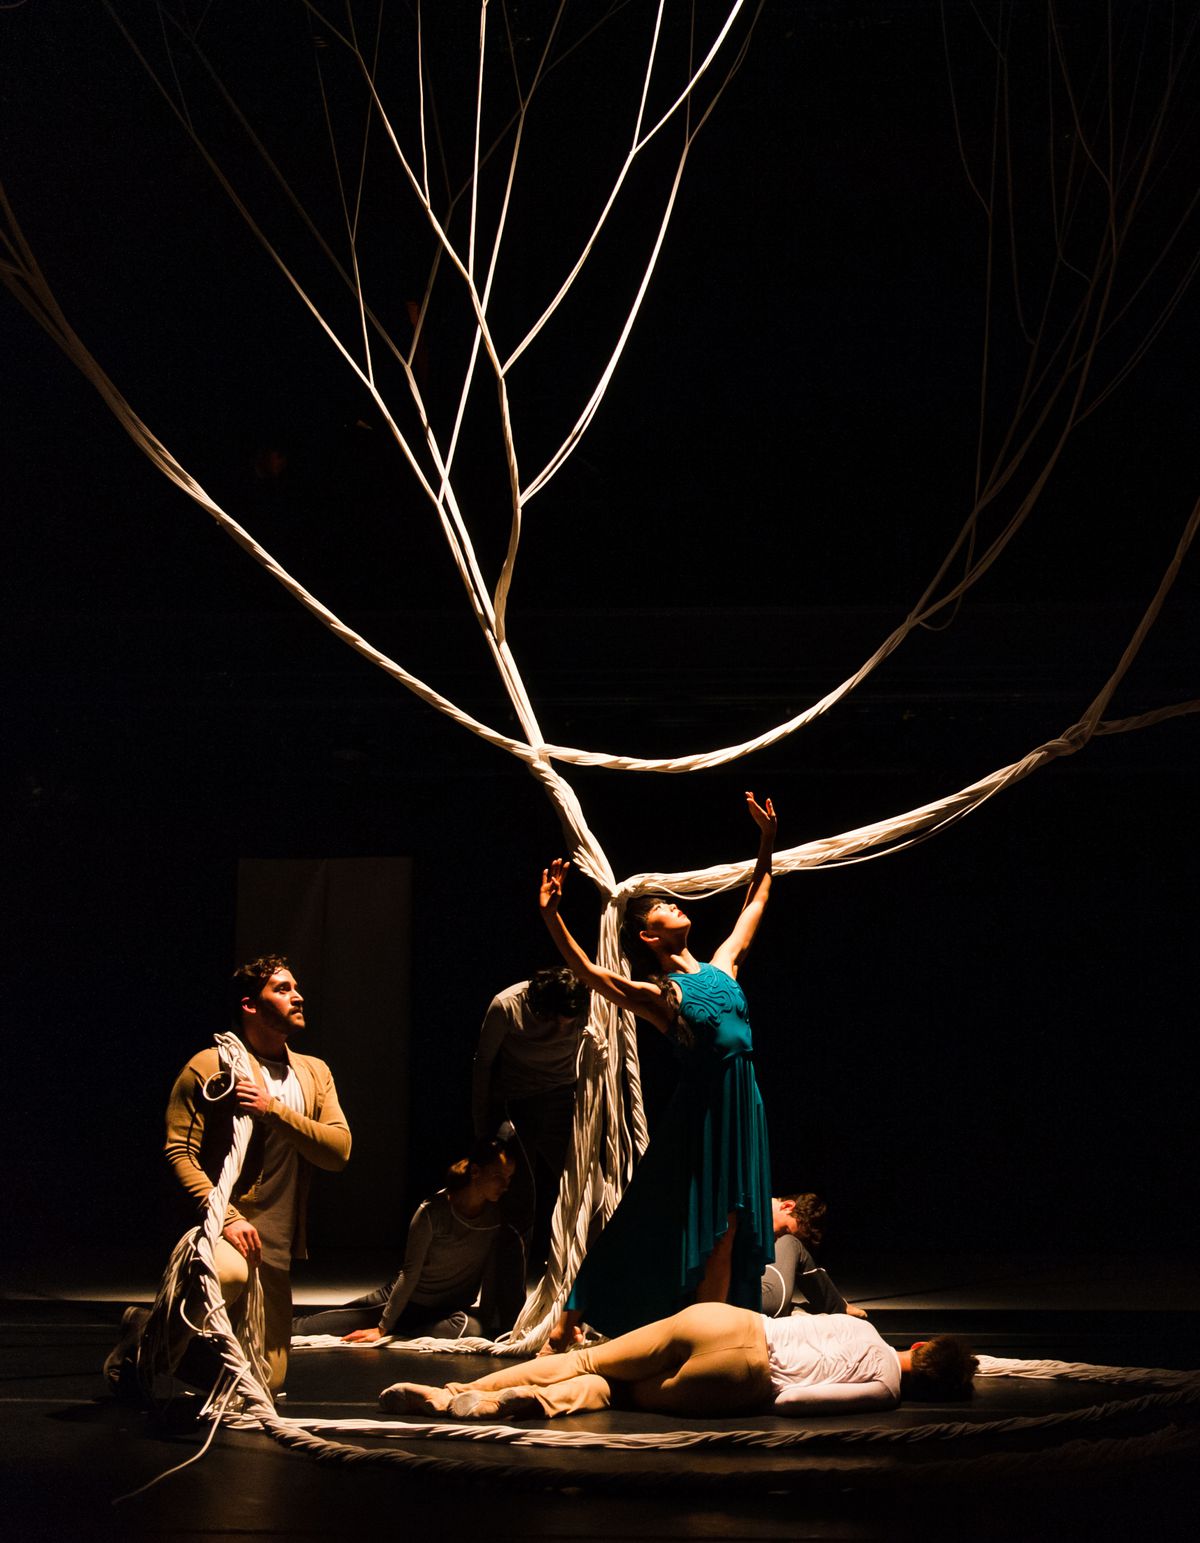 A scene from choreographer Jessica Lang’s “The Wanderer.” (Photo: Courtesy of the Harris Theater)